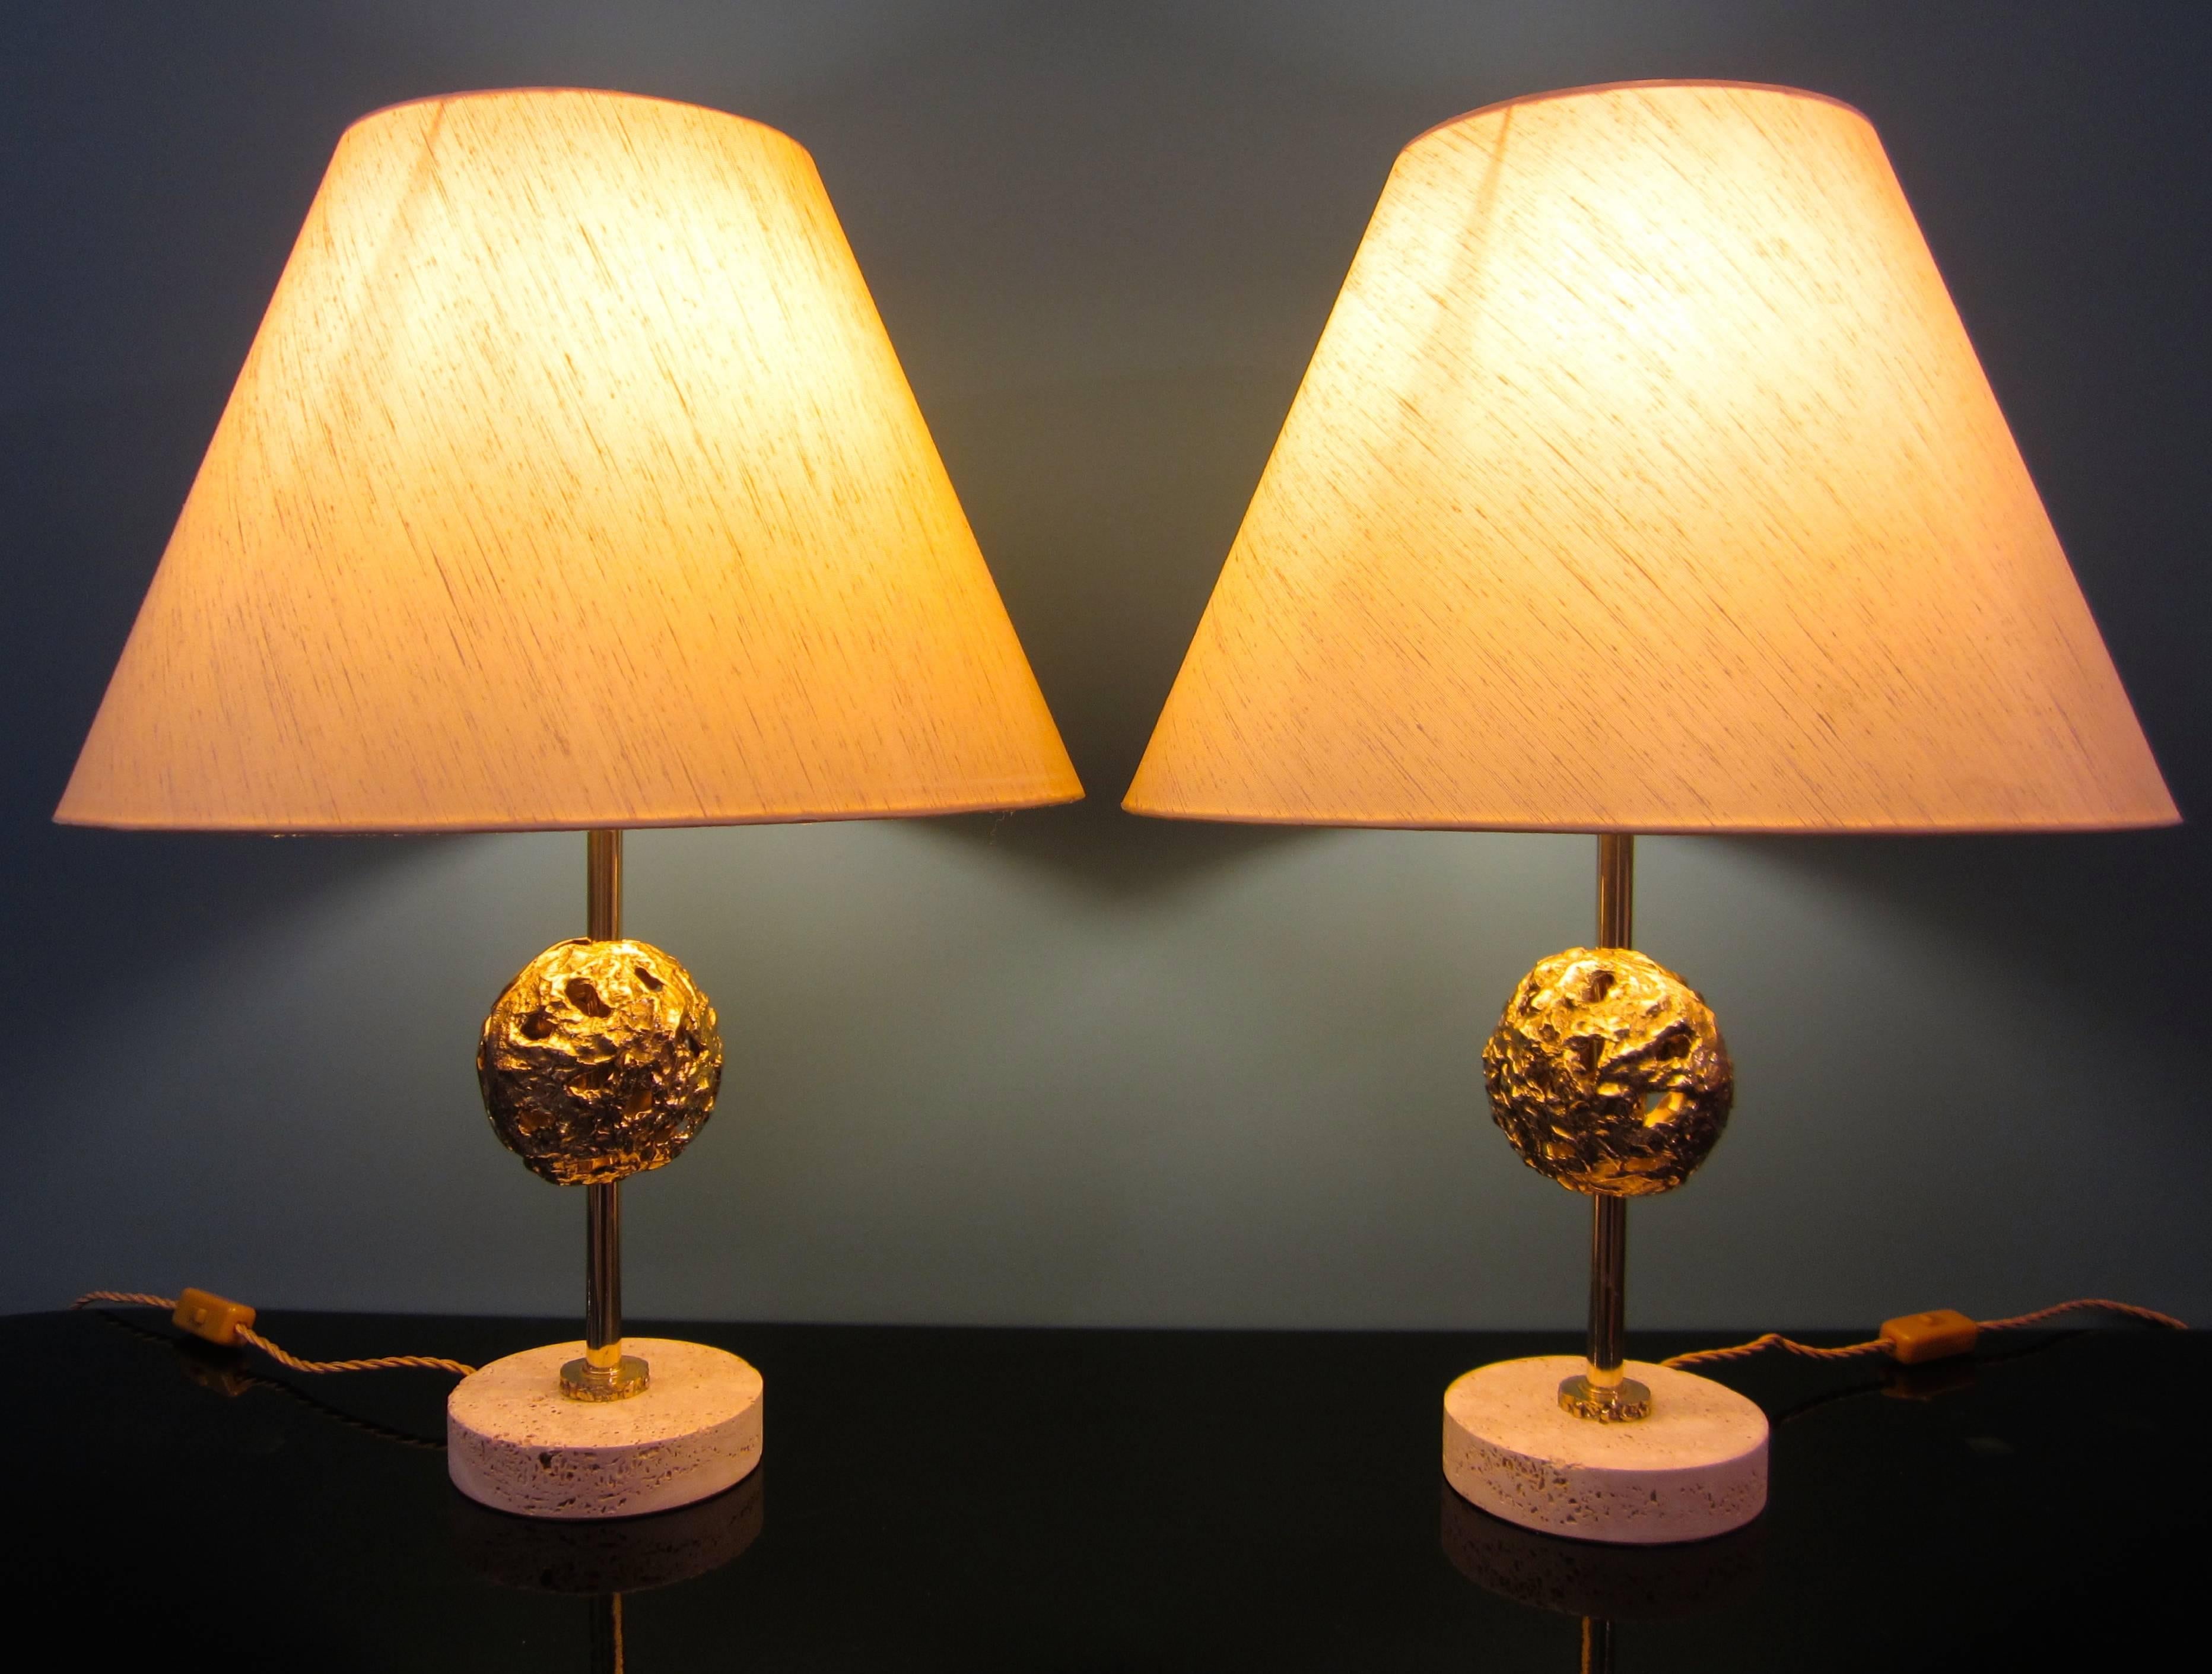 Sculptural pair of table lamps by Angelo Brotto for Esperia, gilt bronze and travertine.